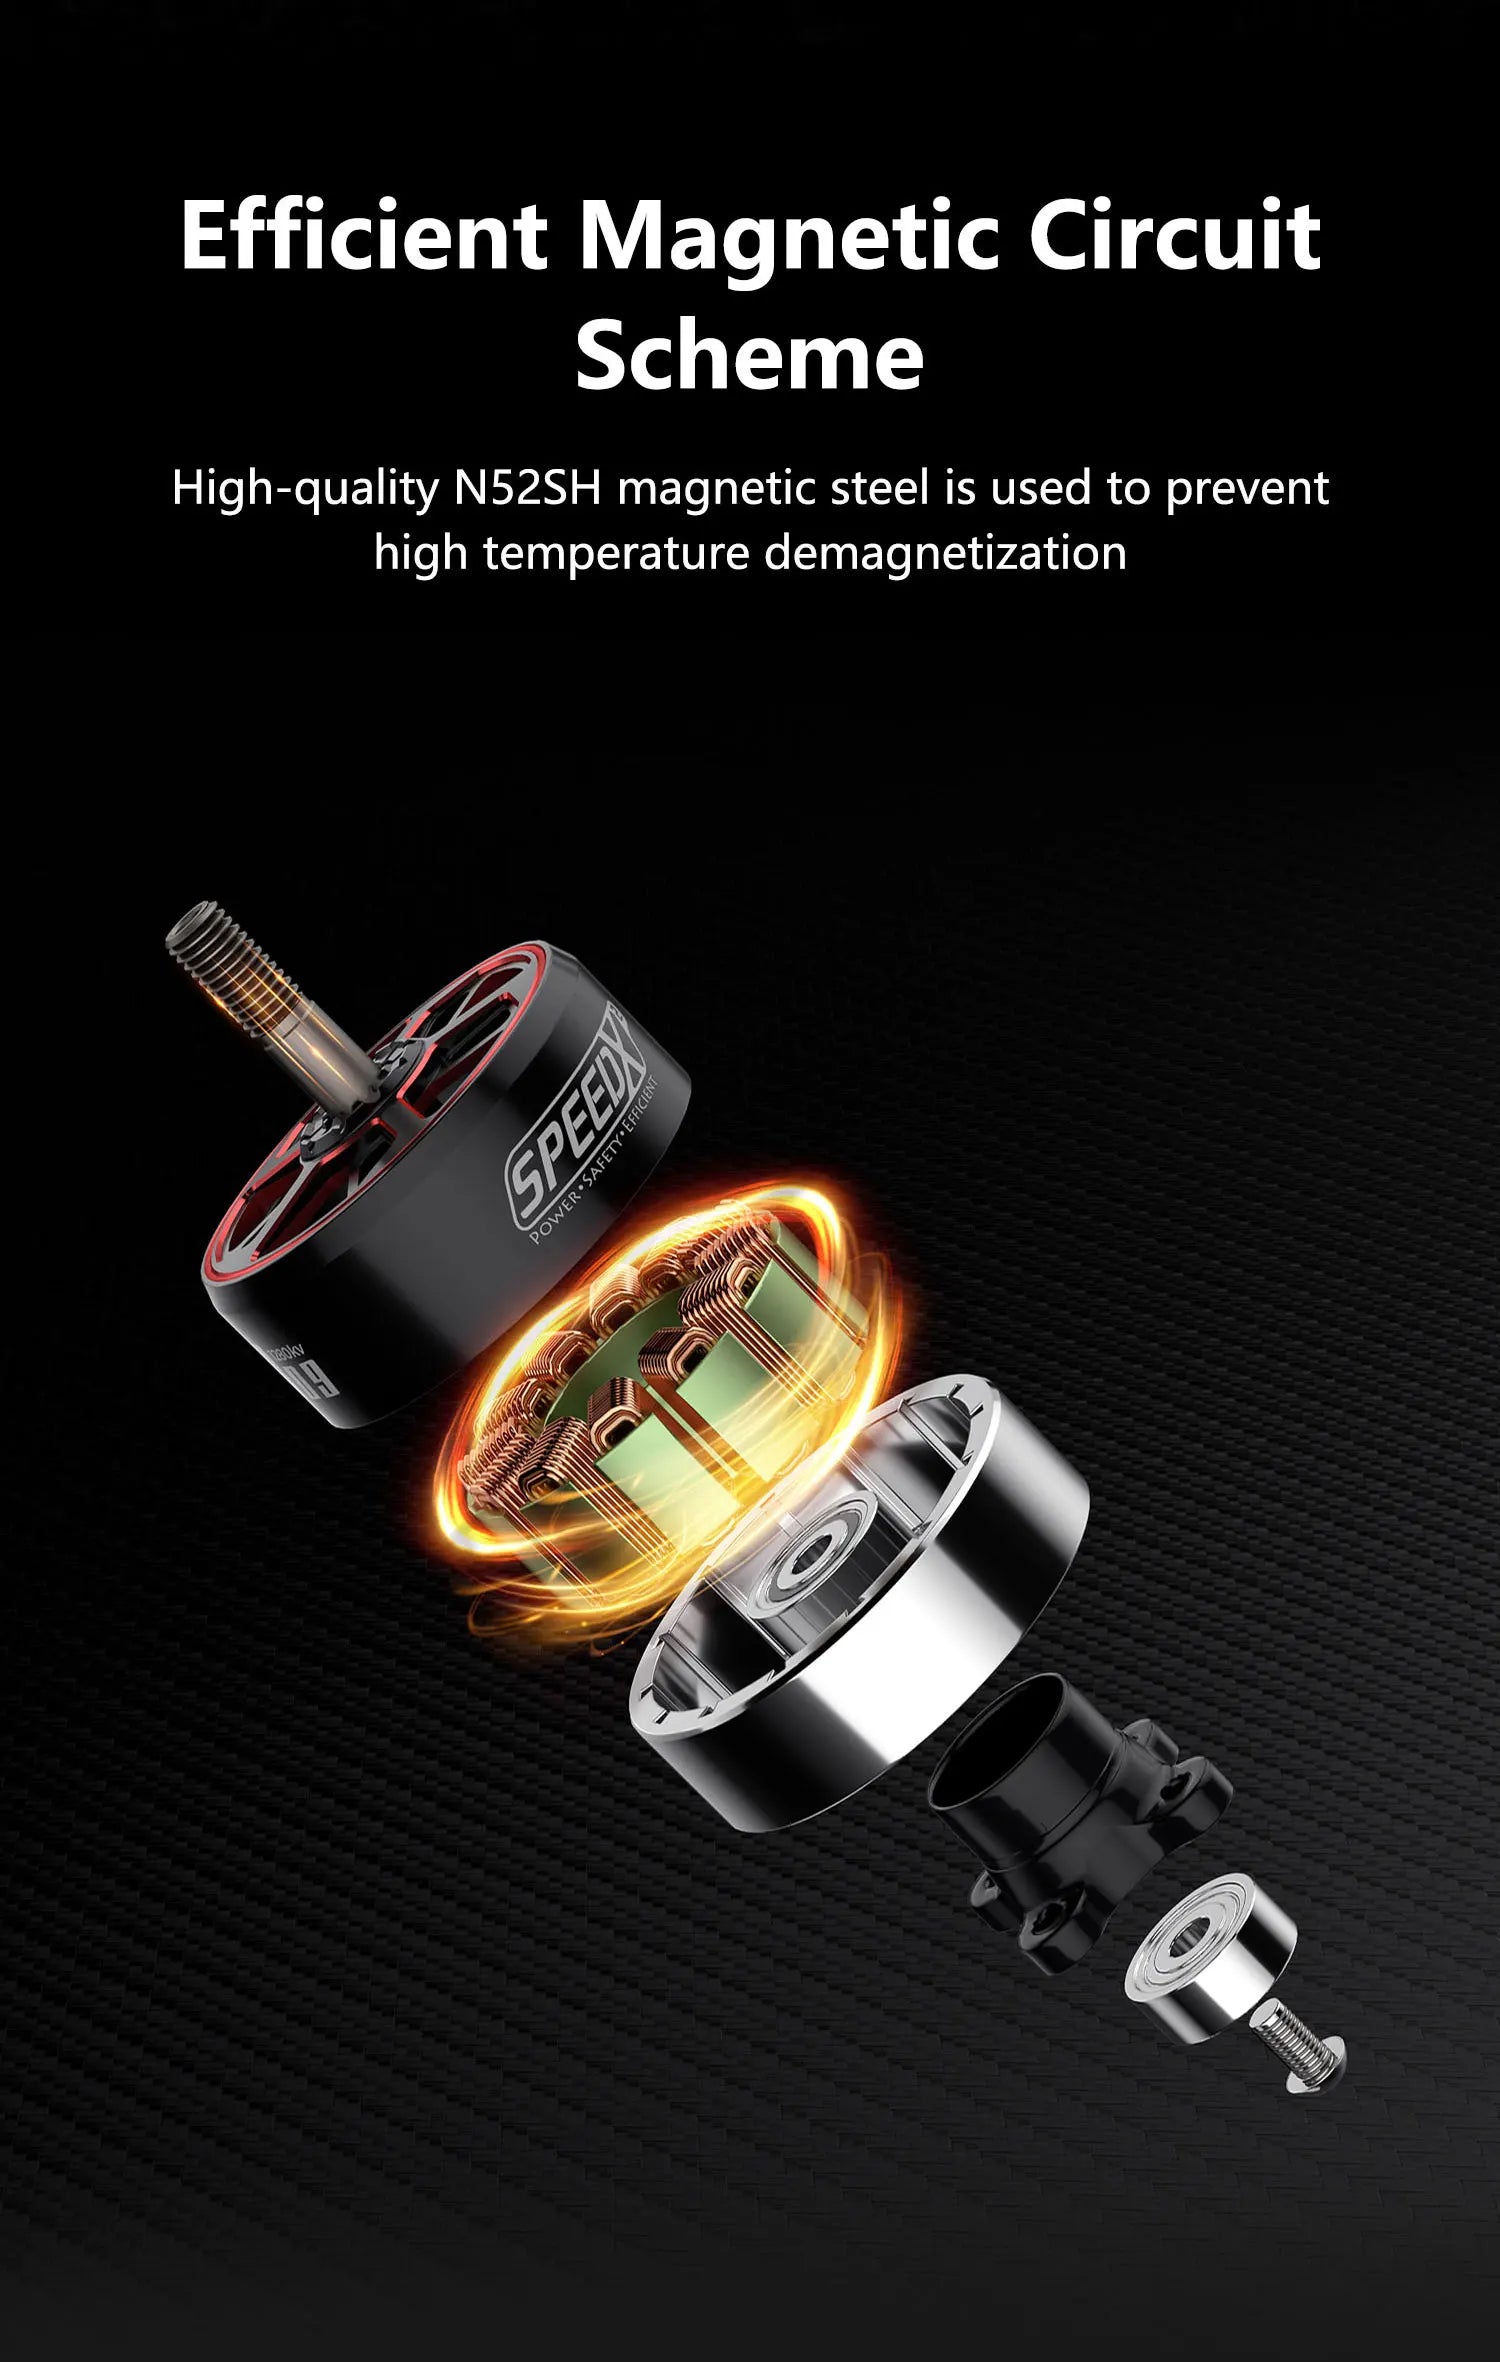 GEPRC SPEEDX2 2809 1280KV Motor, Efficient Magnetic Circuit Scheme High-quality NSZSH magnetic steel is used to prevent